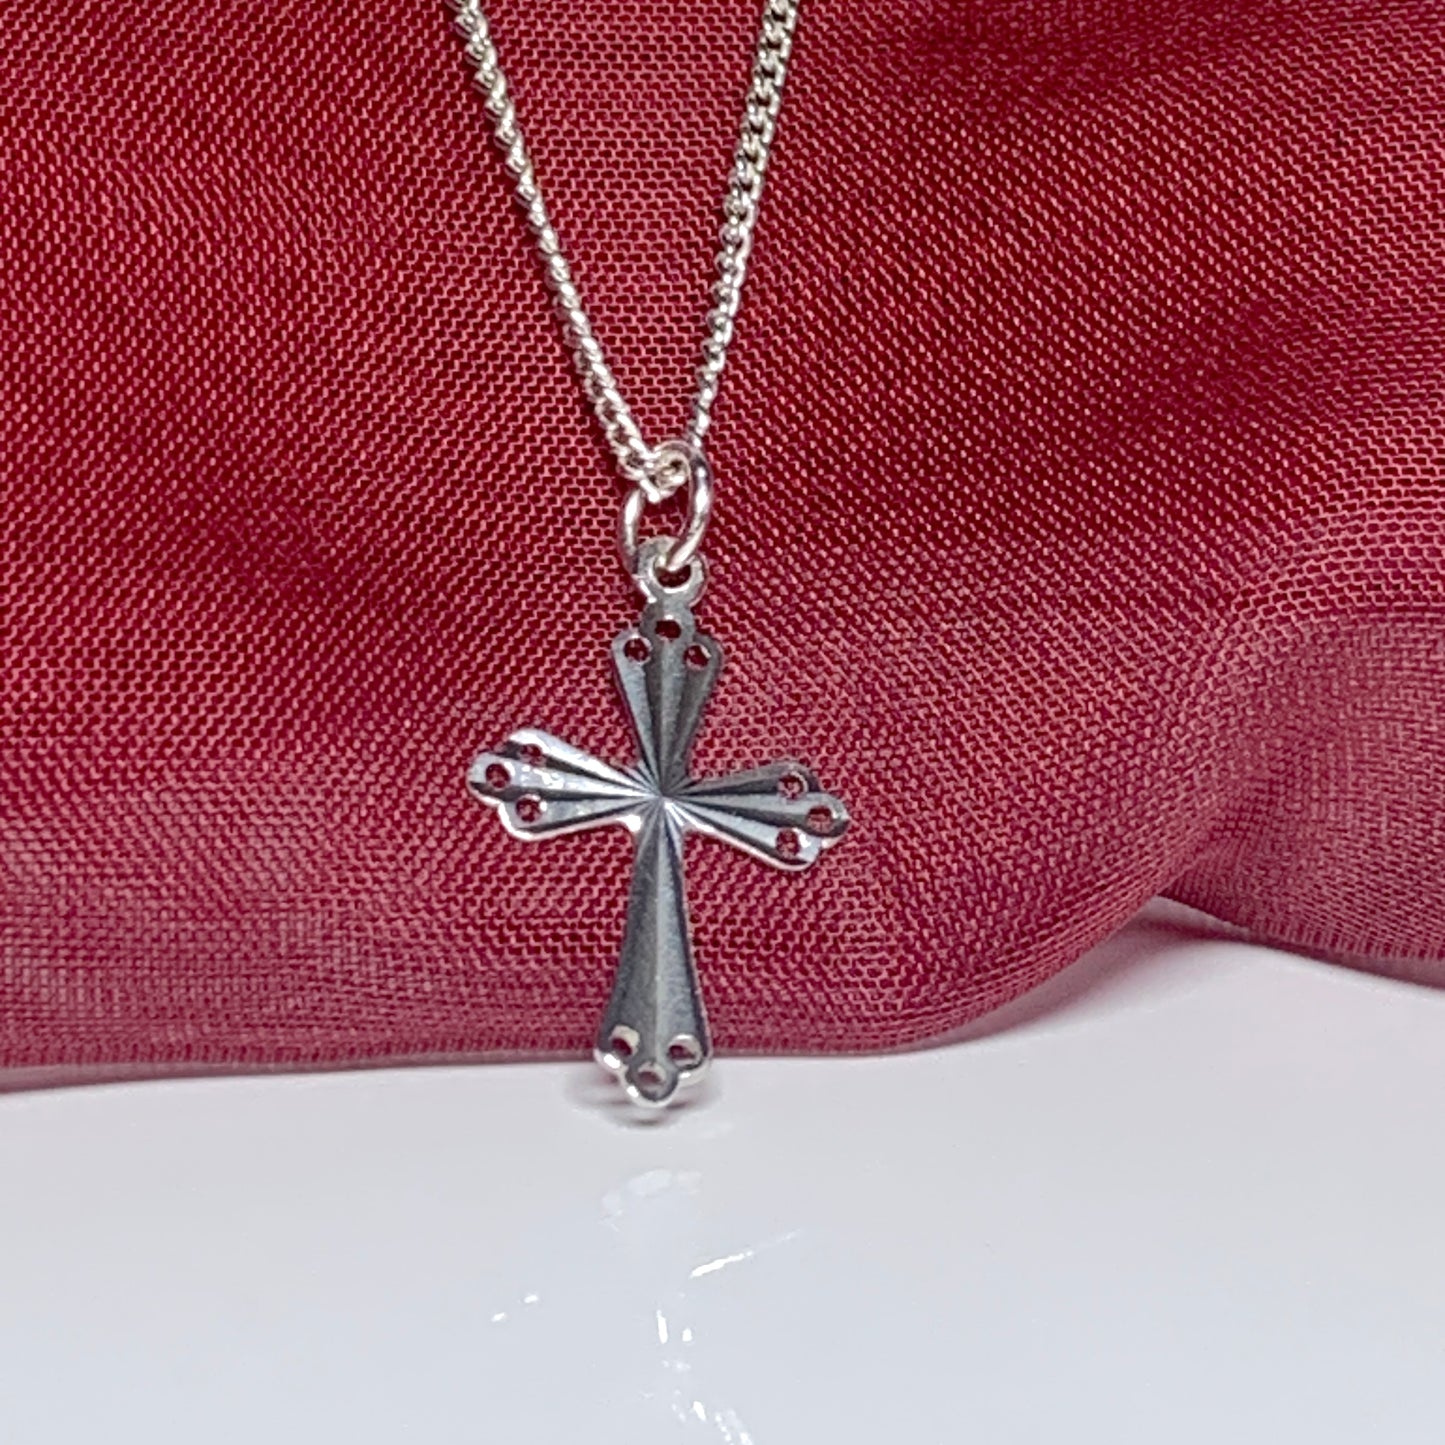 Small solid cross open pierced patterned sterling silver diamond cut with chain